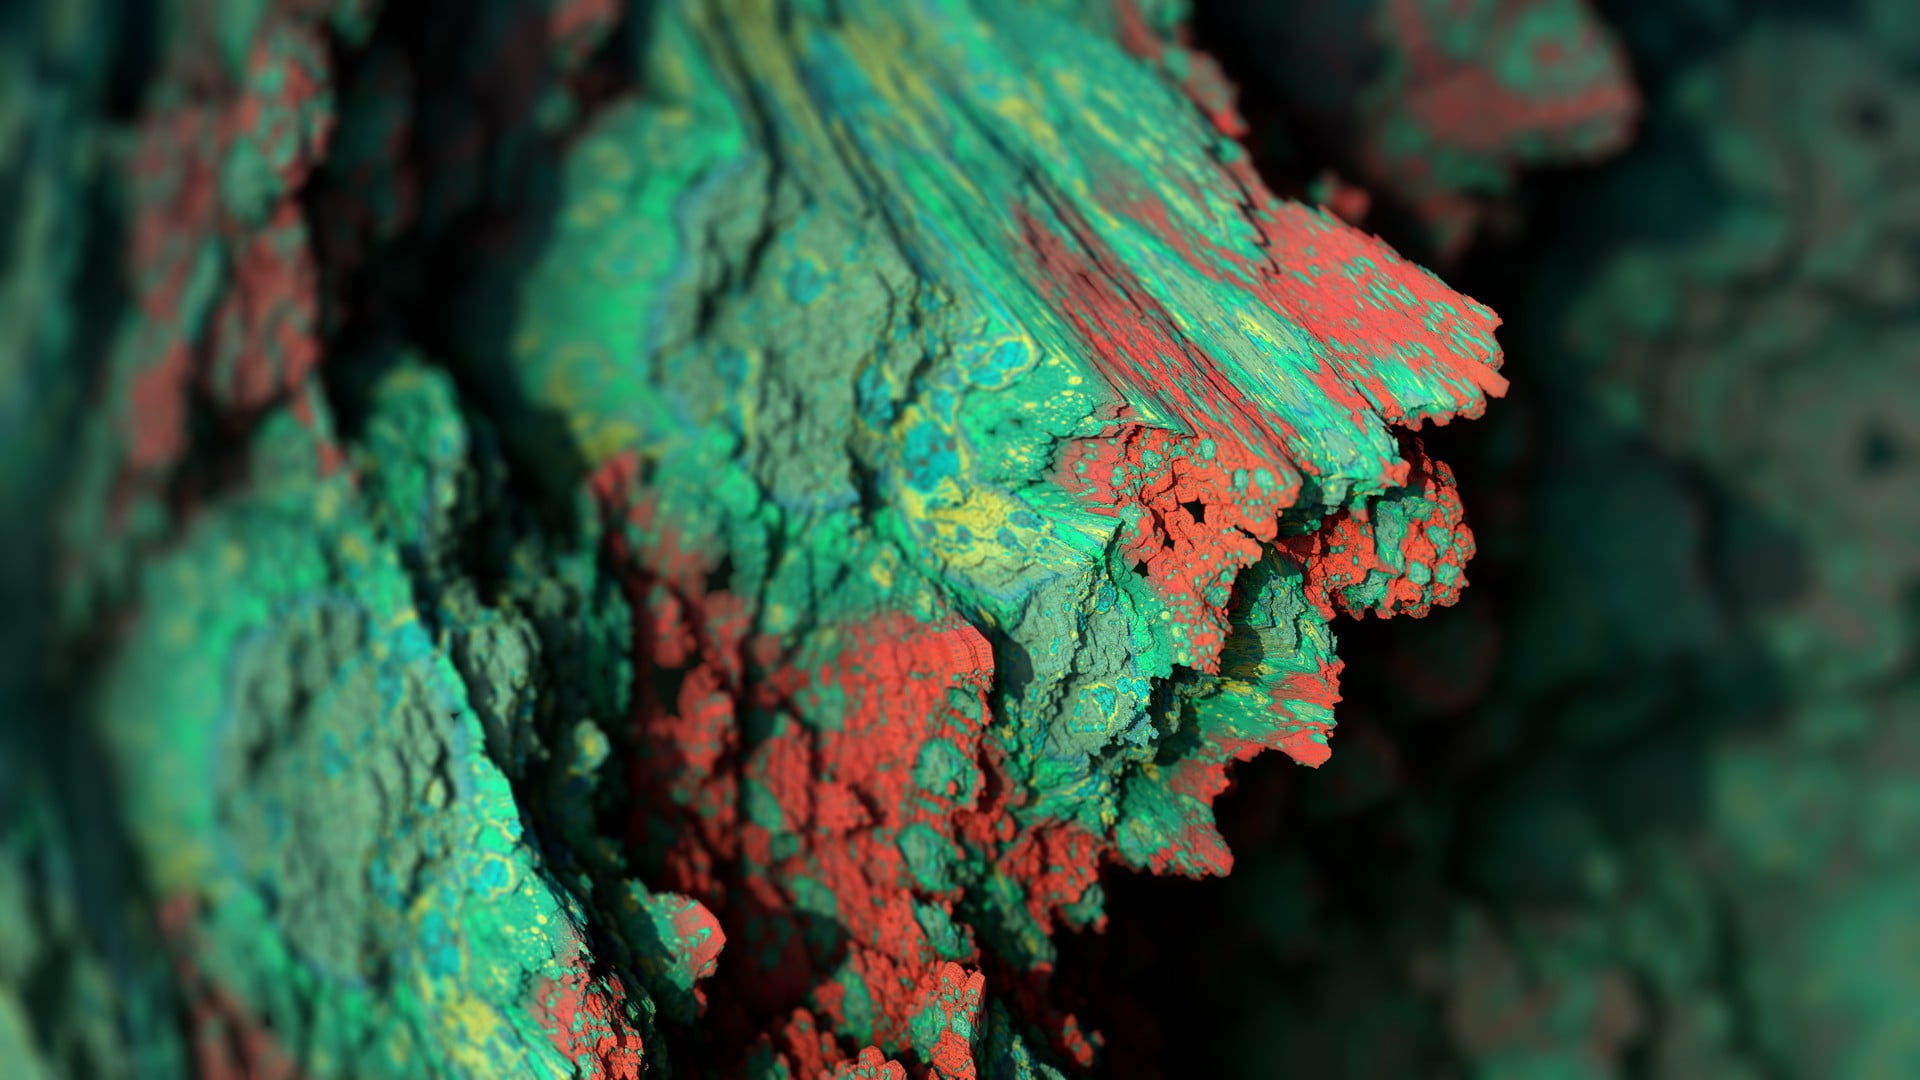 Green and red stones, Abstract mineral art, Depth of field beauty, Vibrant gemstones, 1920x1080 Full HD Desktop